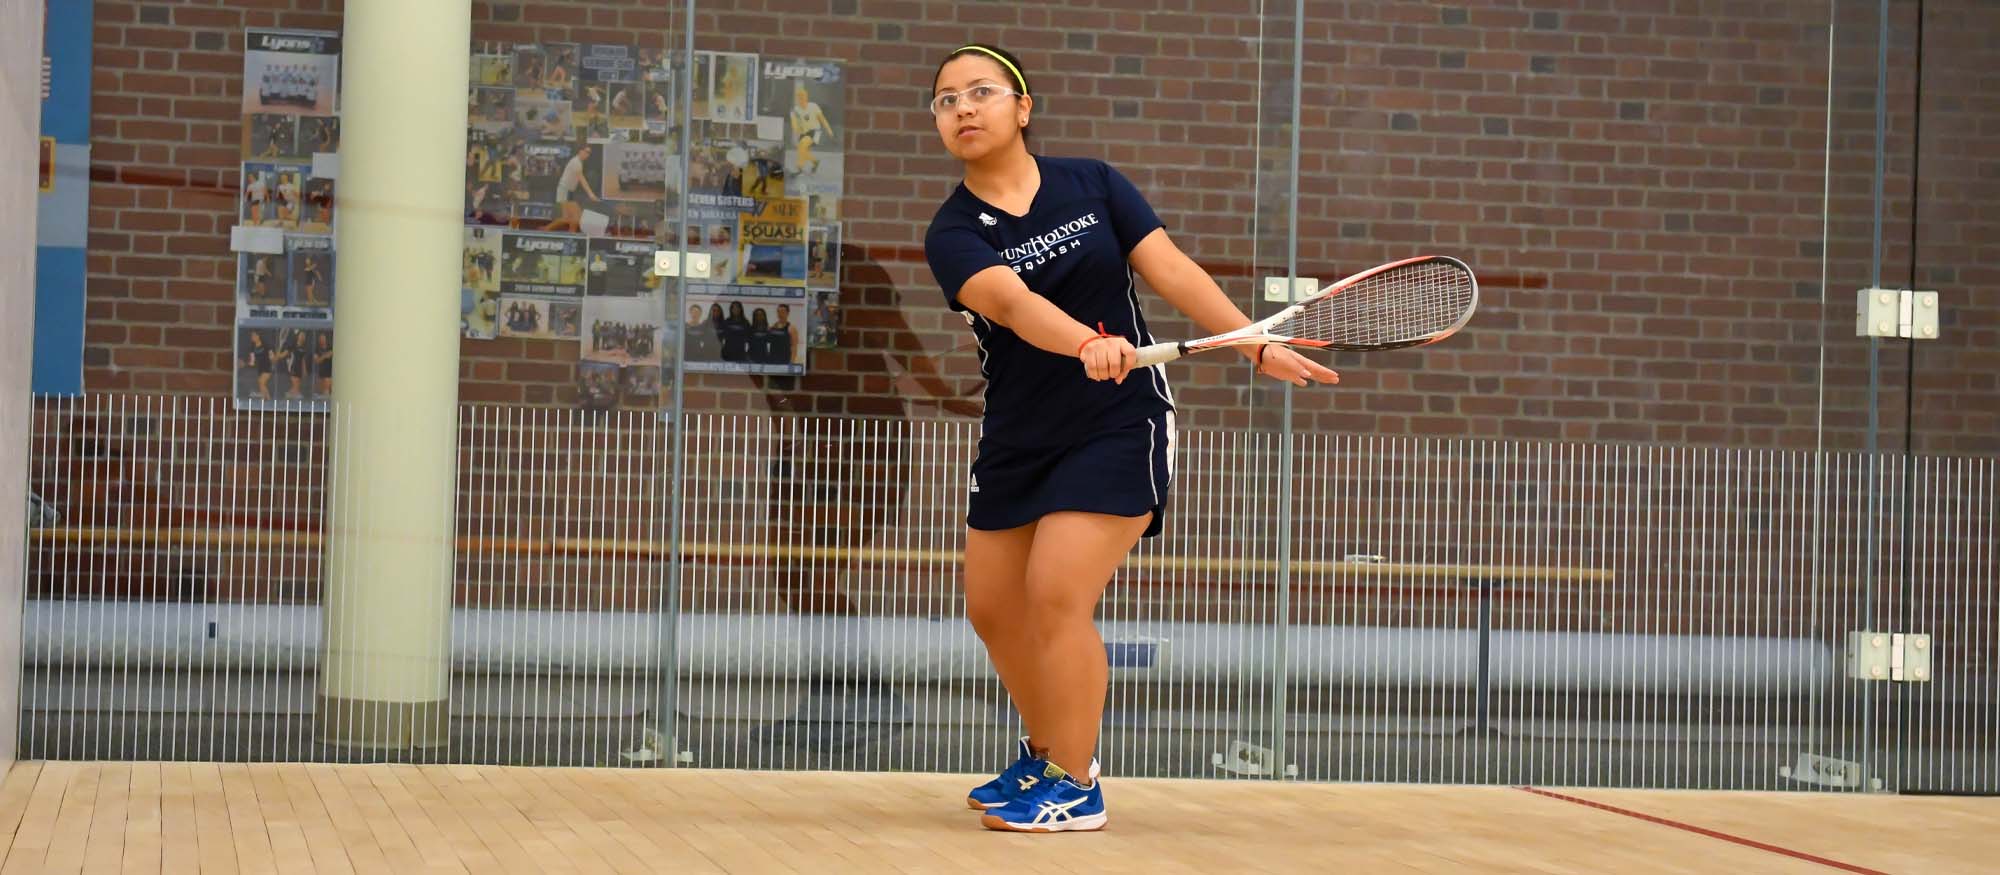 Squash Prevails Over Bard in Home Match